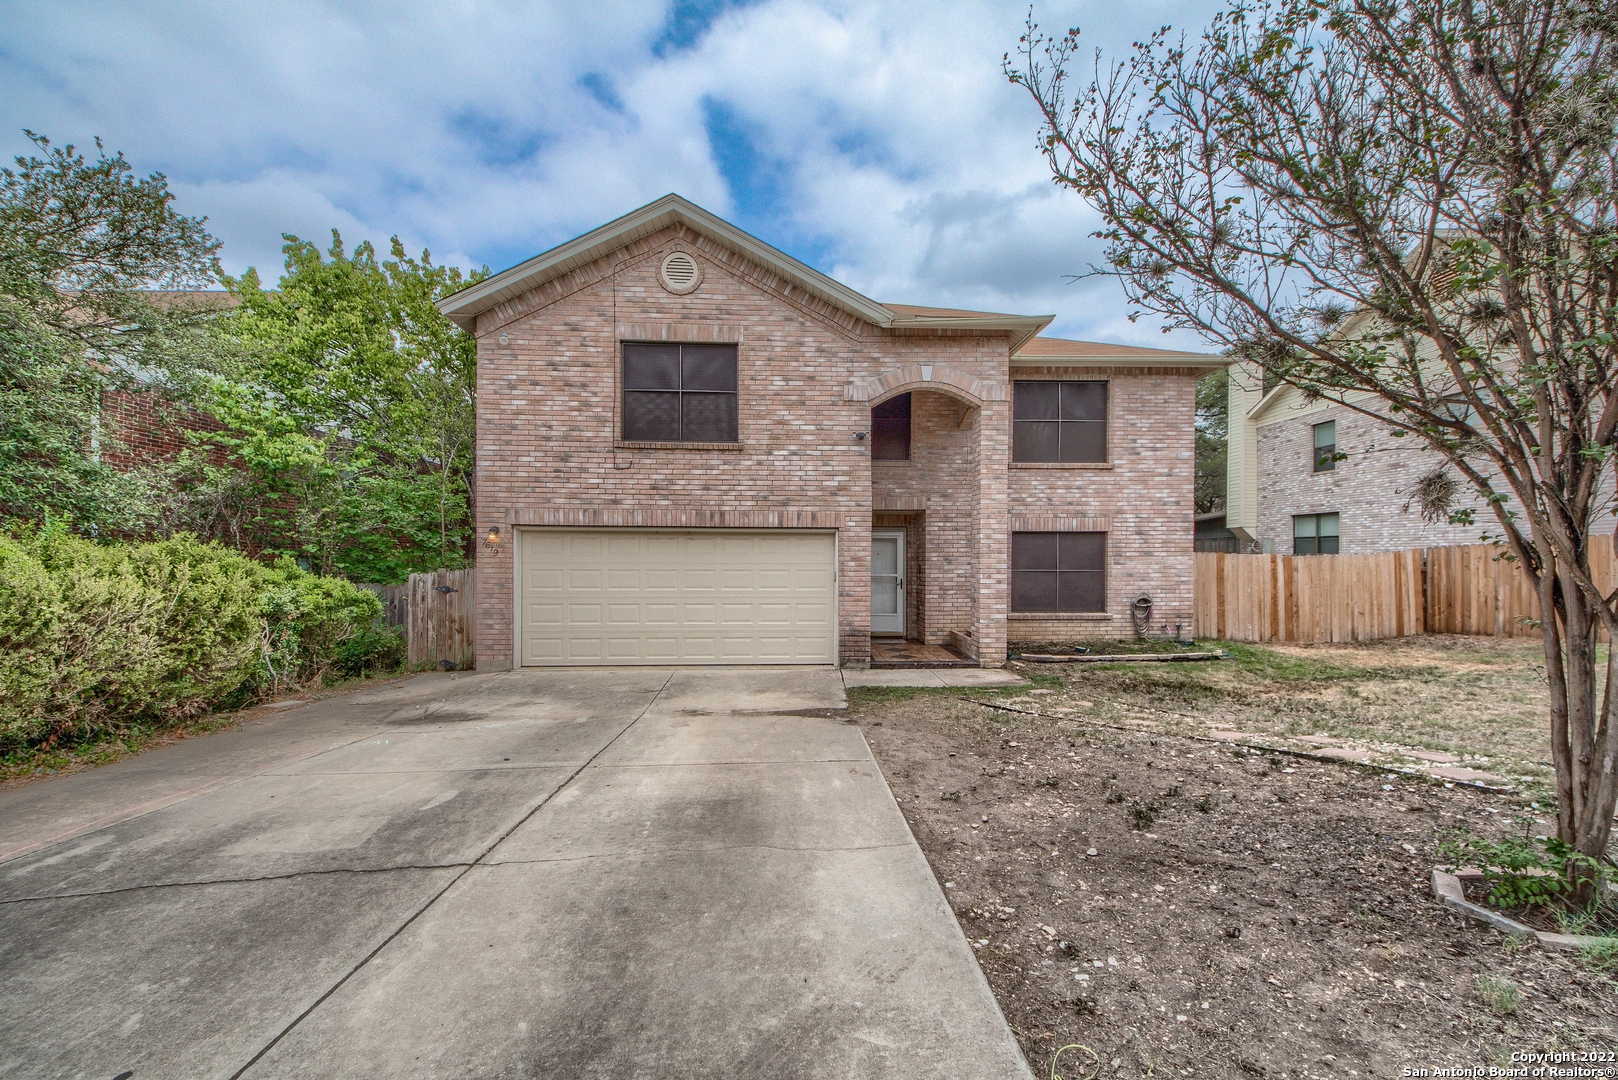 *** Open House Saturday 8/20 12pm-4 pm ***  5 bedroom 3.5 baths home is ready to be yours! Primary bedroom/bathroom is downstairs, and 4 bedrooms with large game room upstairs. Conveniently located near UTSA, La Cantera, Rim and minutes from Downtown San Antonio.